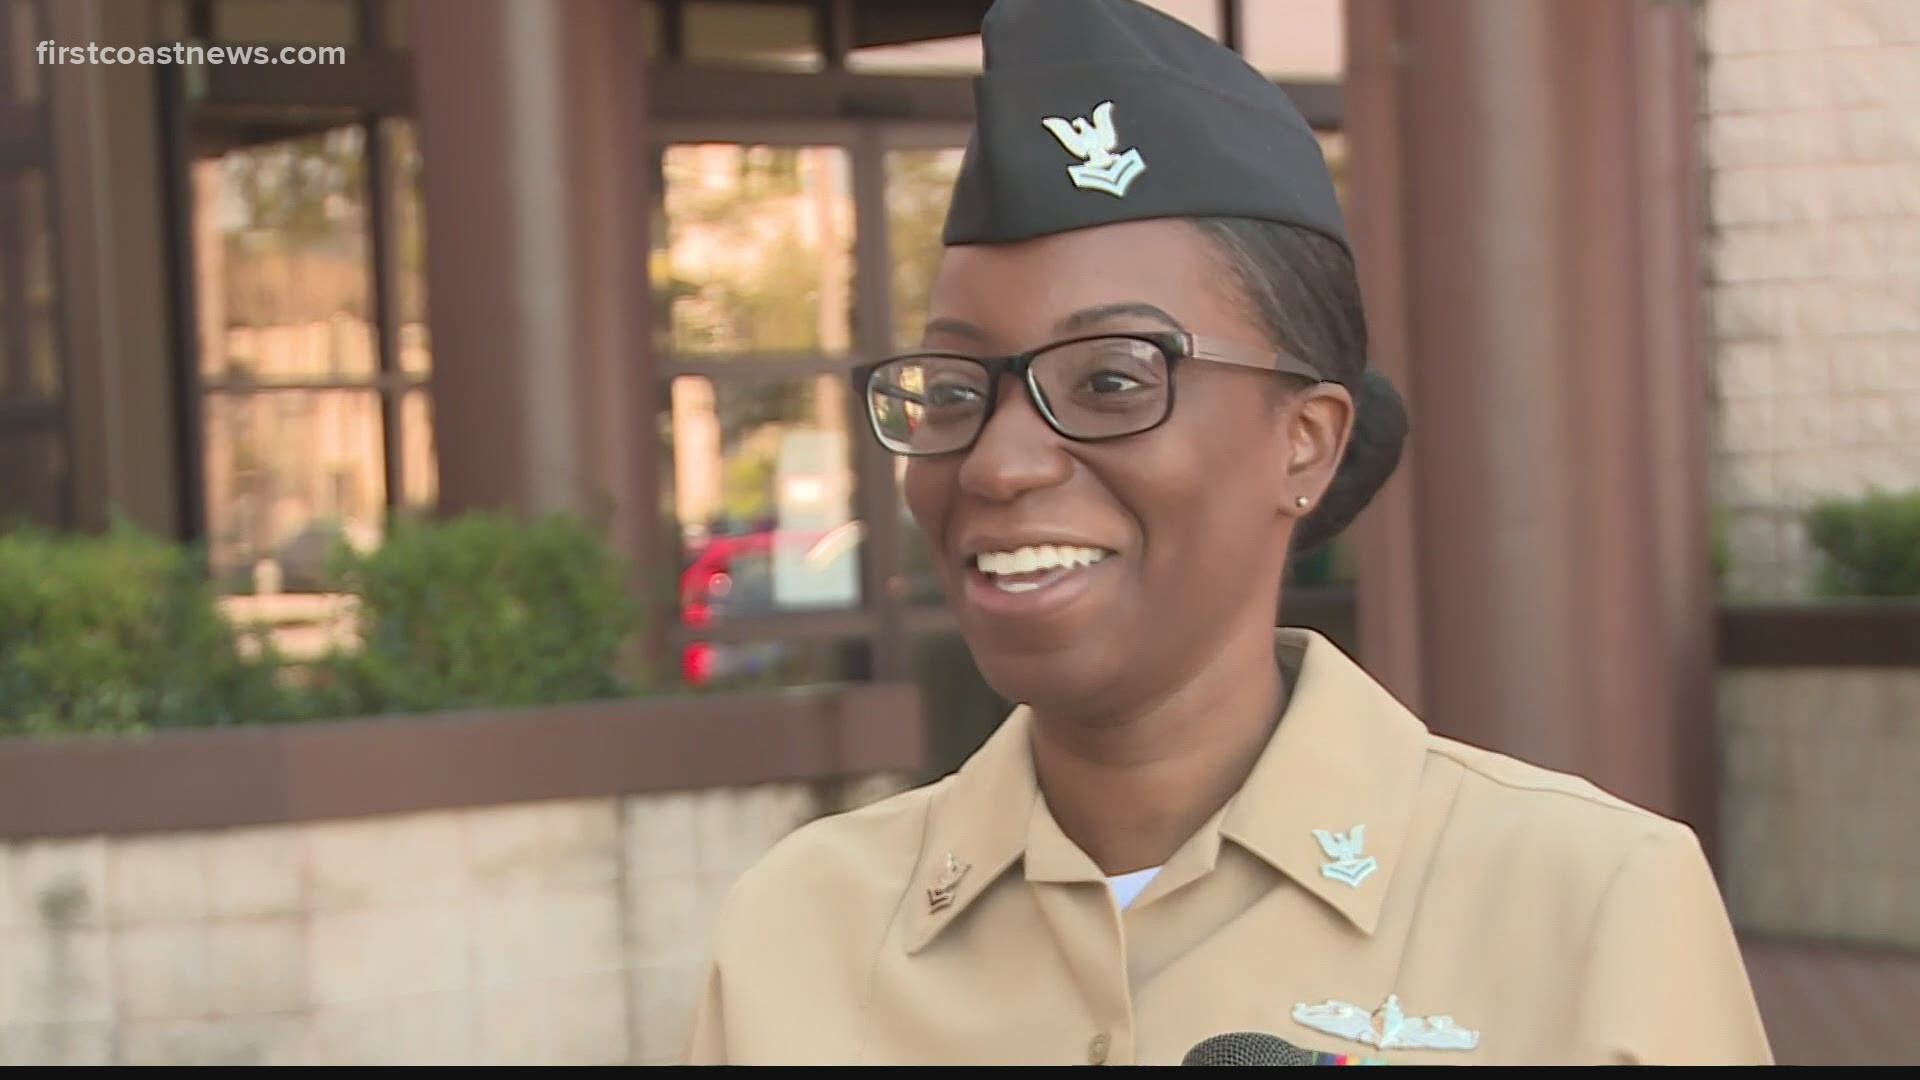 Before Petty Officer Second Class Verlinne Sylla was helping sailors find a place to live, she completed a deployment on board the USS Dwight D. Eisenhower.